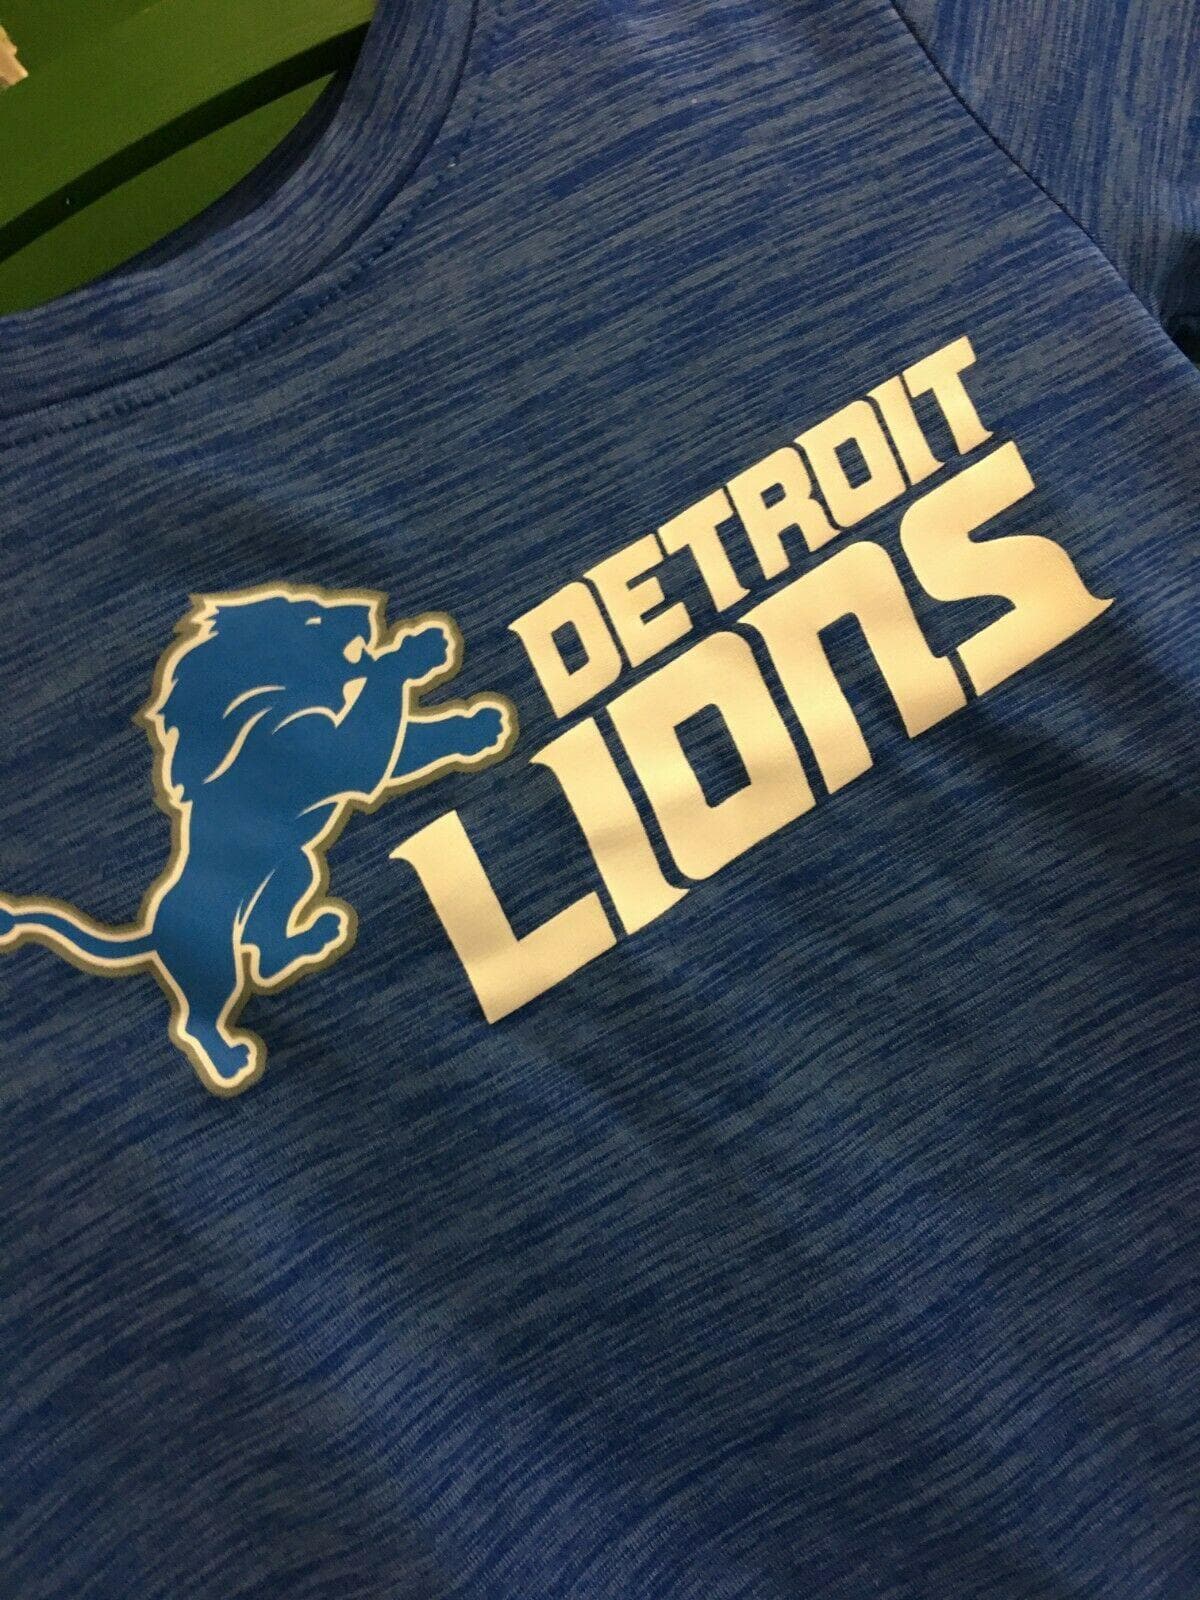 NFL Detroit Lions Wicking Space Dye T-Shirt Toddler 2T